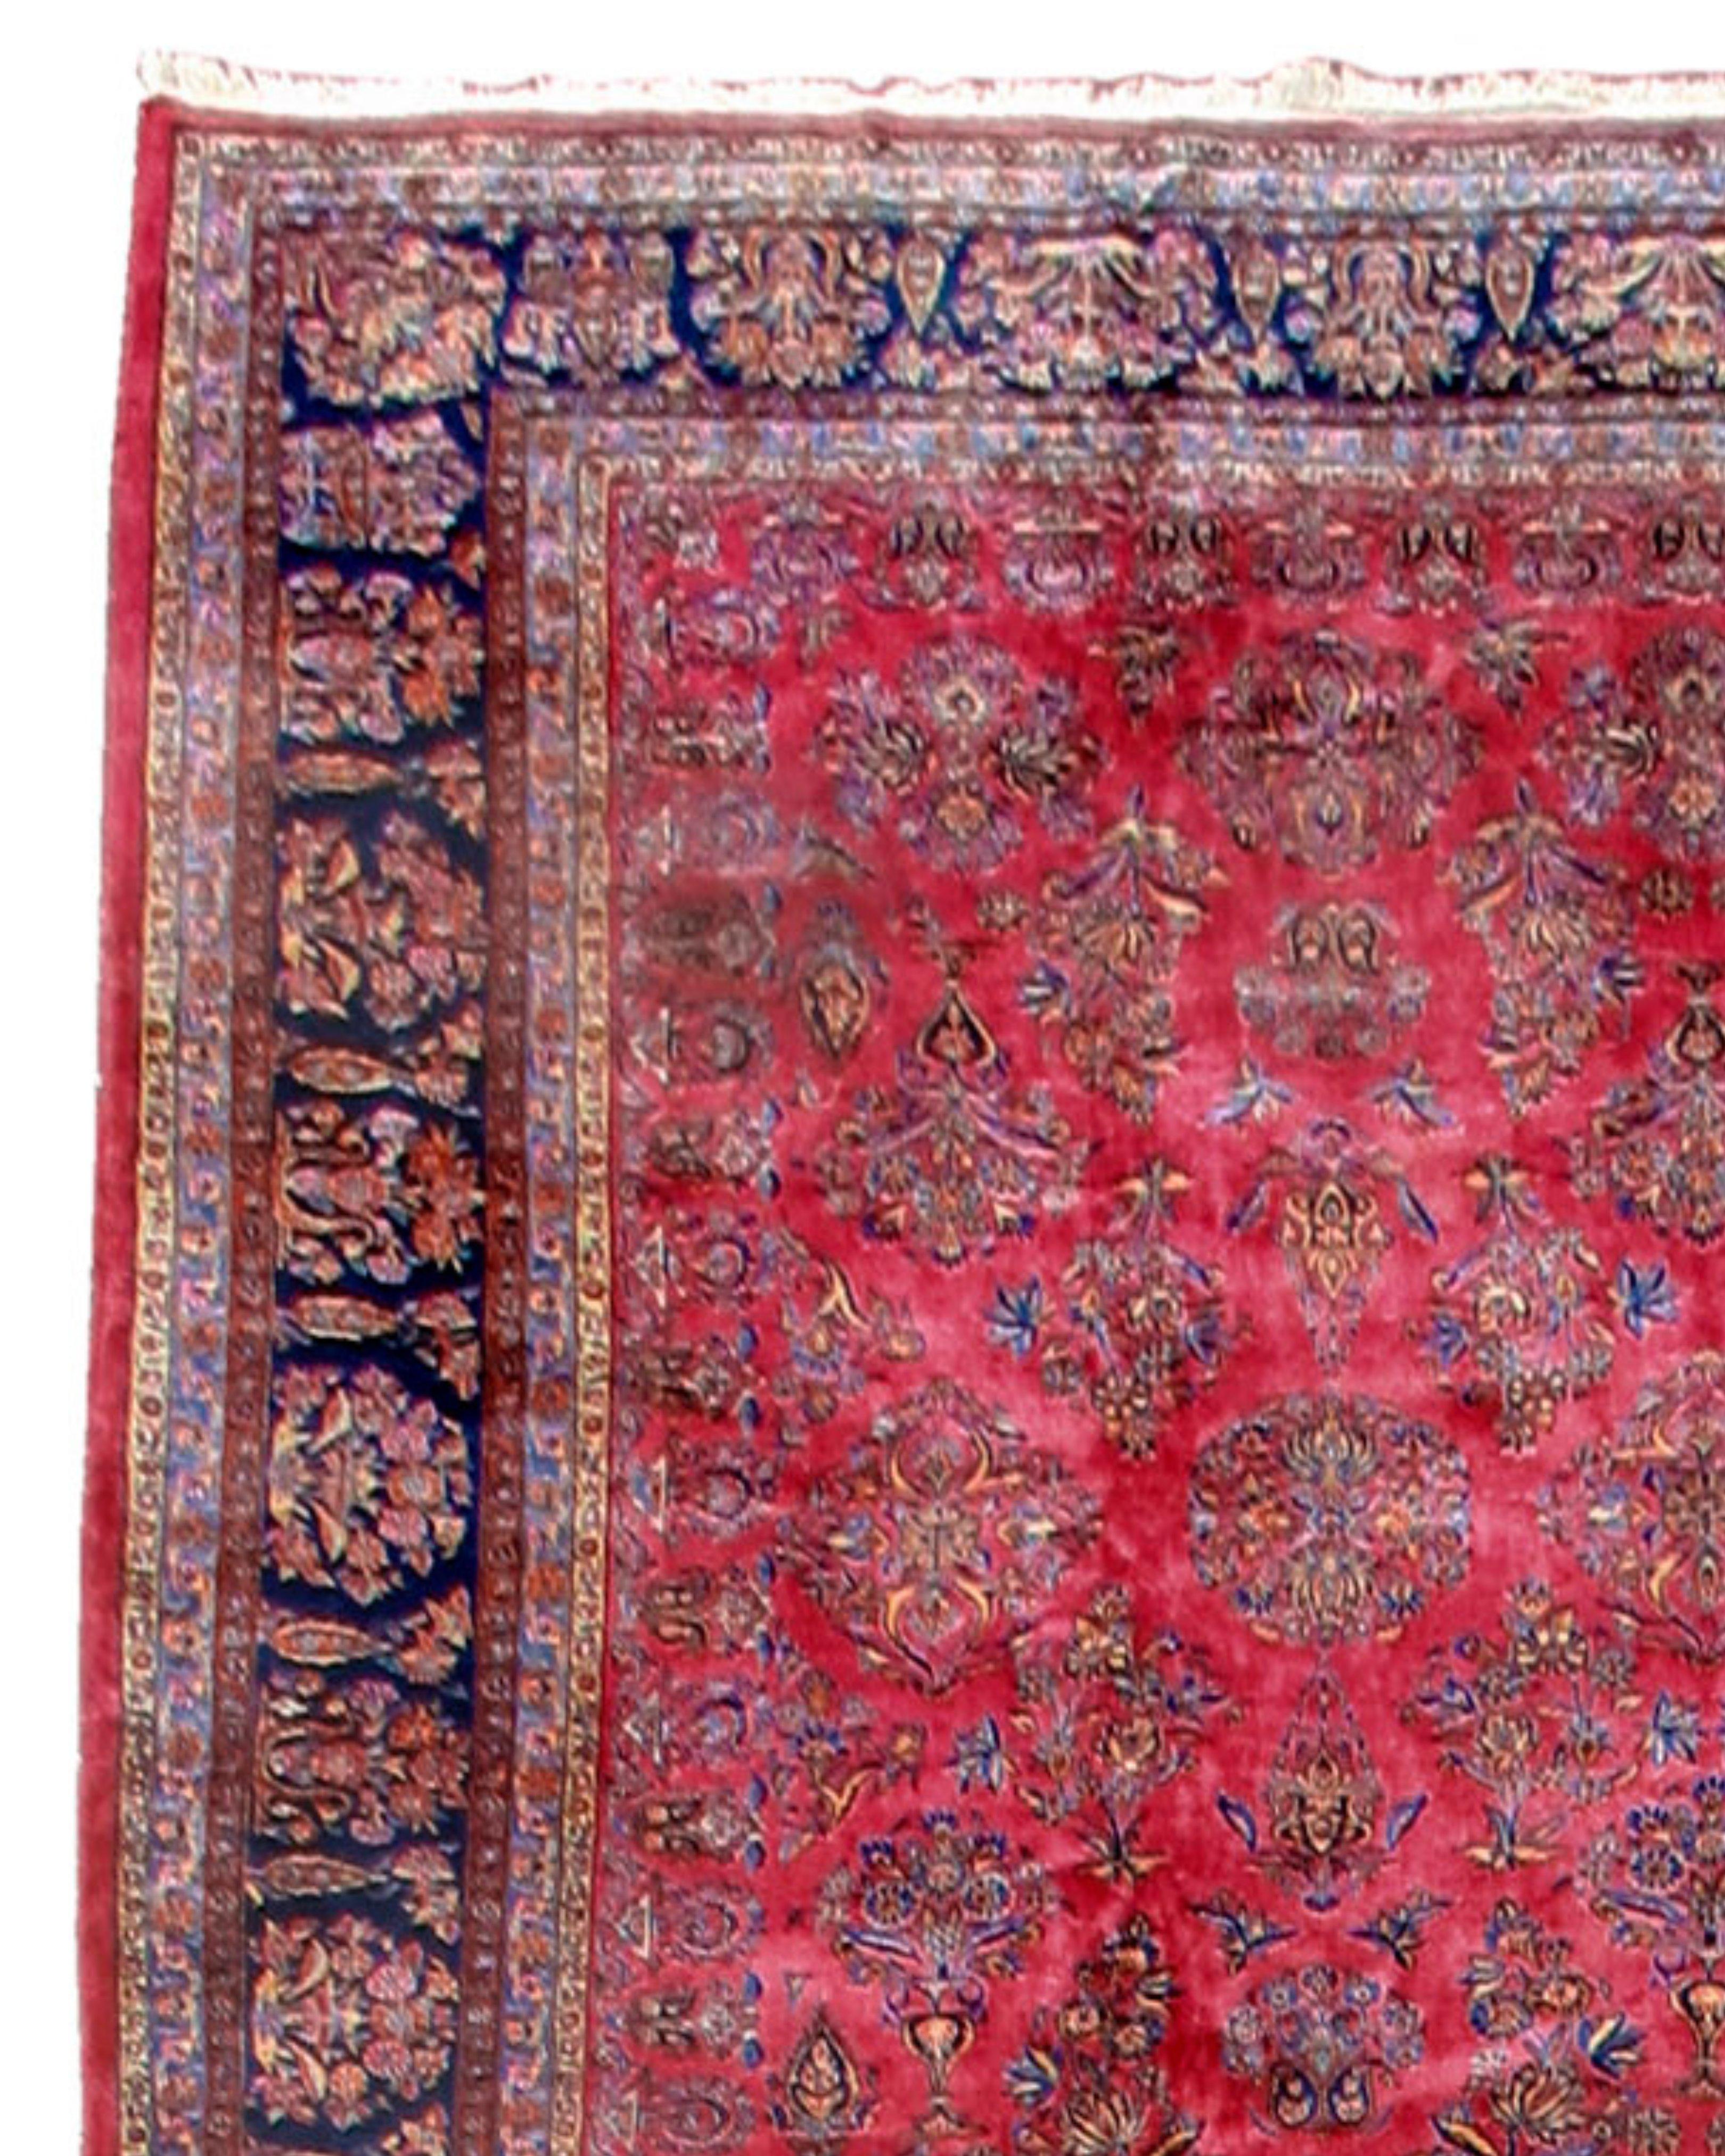 Hand-Knotted Large Antique Persian Kashan Carpet, c. 1930 For Sale